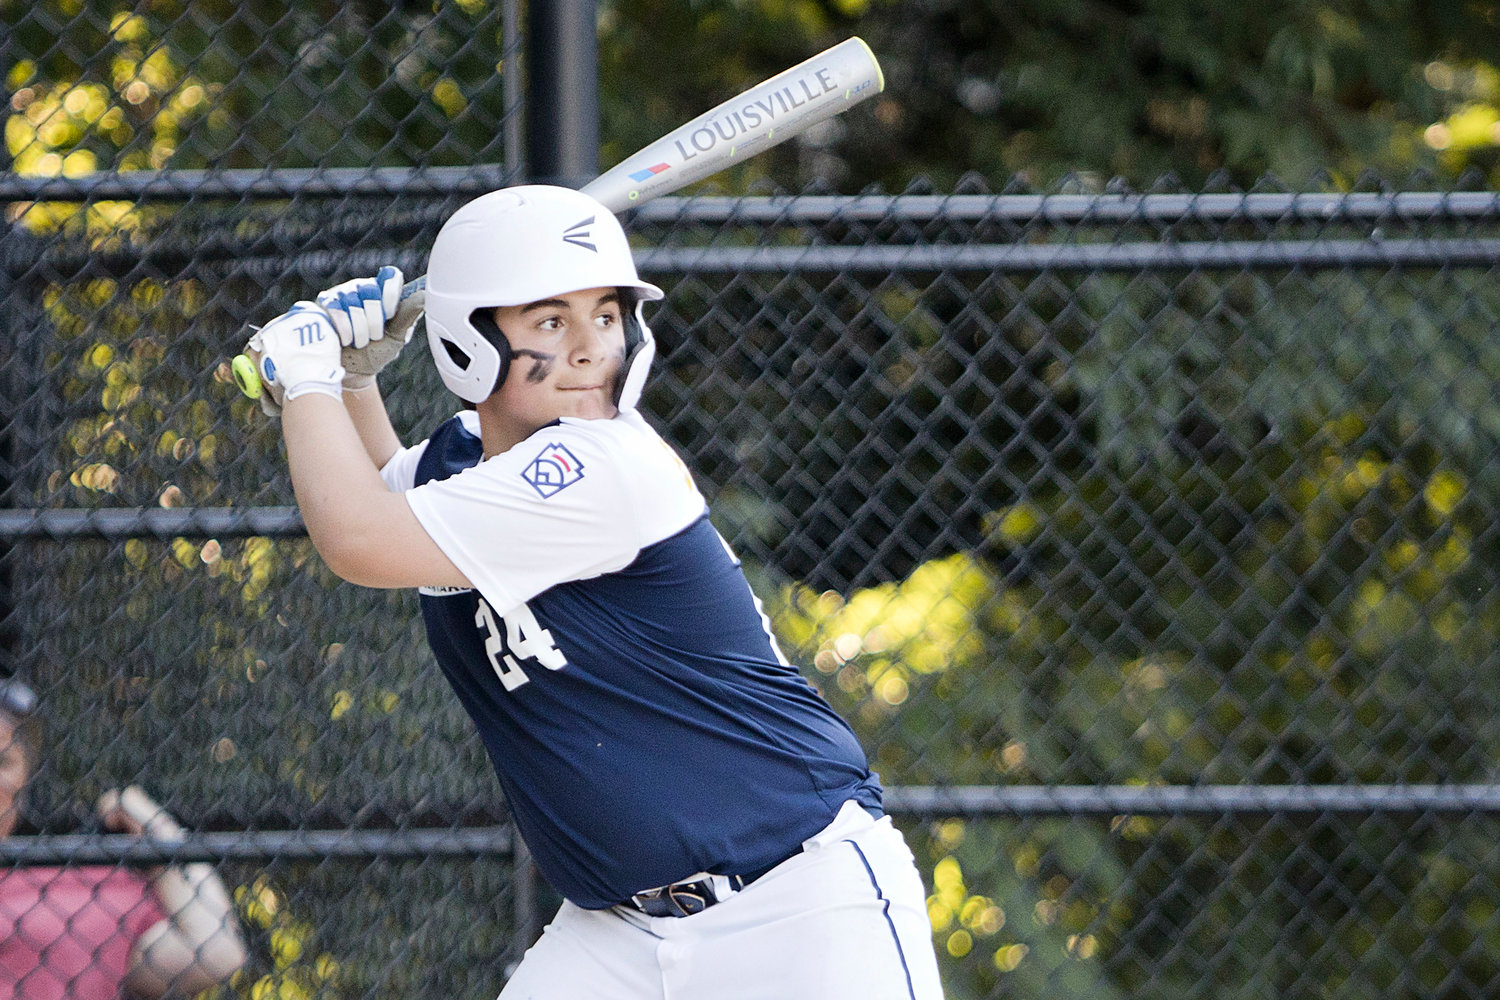 Barrington's Ellis Brittelle goes up to bat against East Providence in the 12U All-Star game, Saturday.